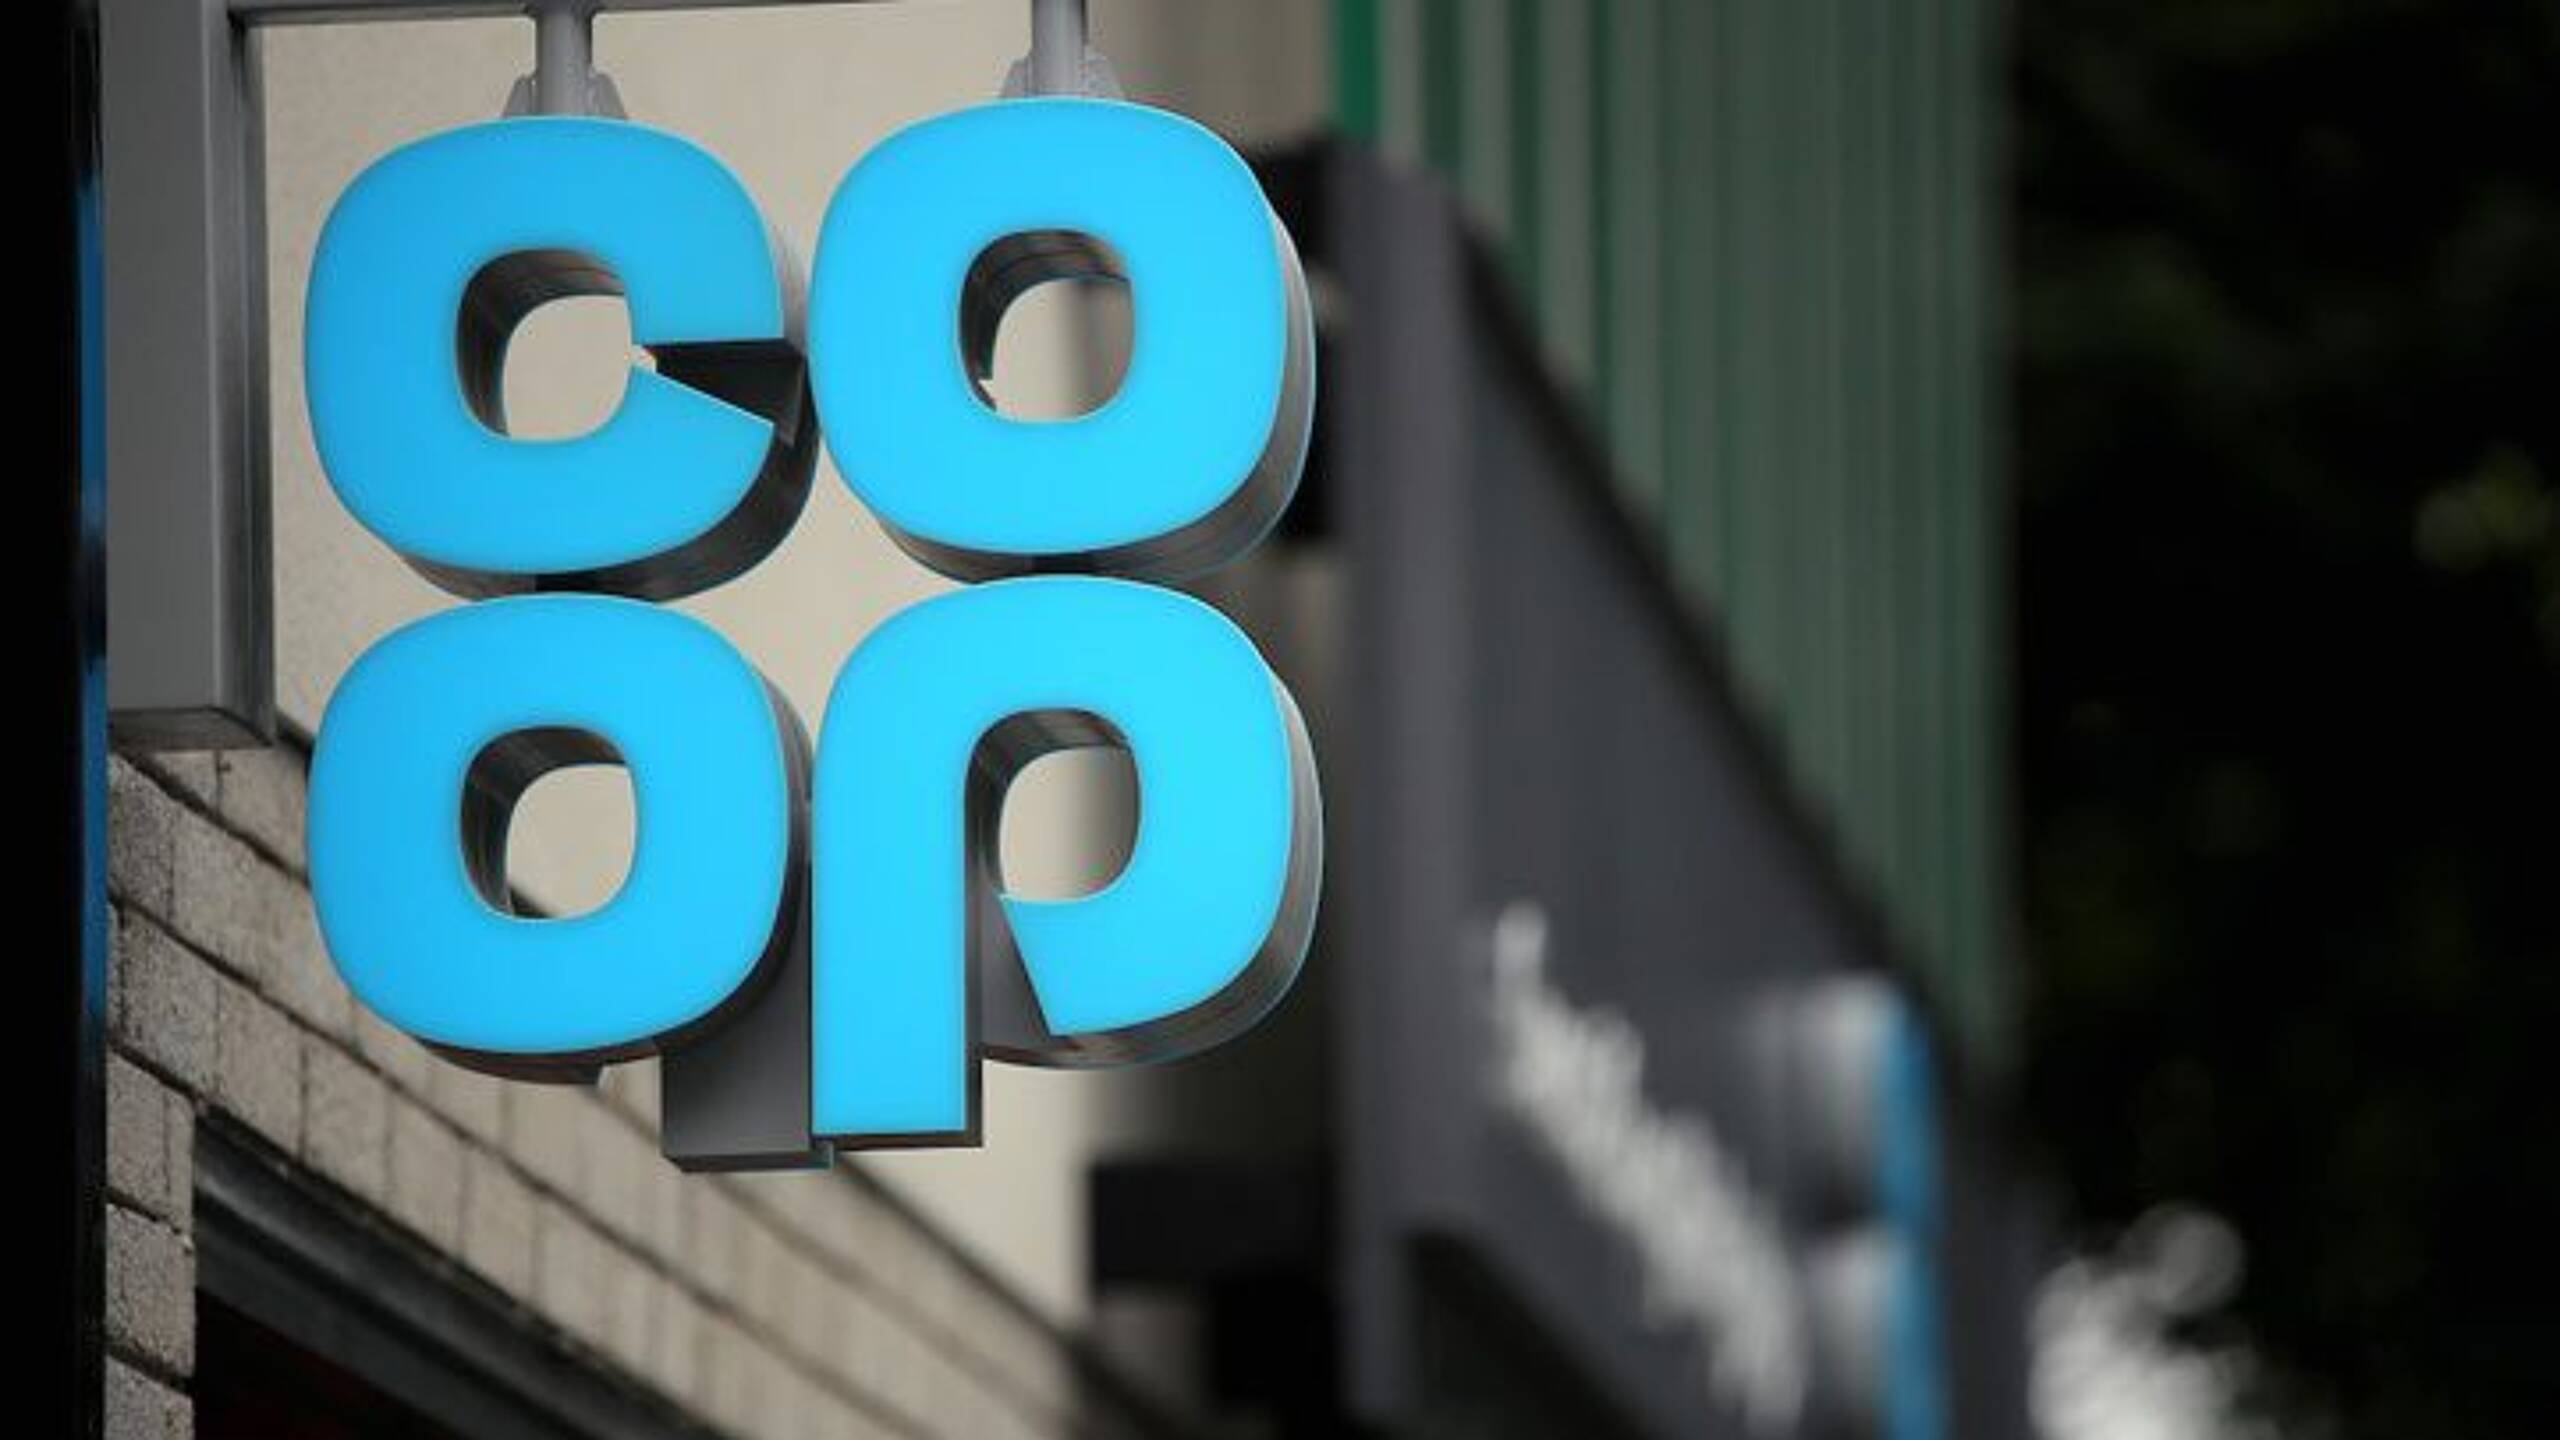 Co-op bans sale of peat-based compost to reduce emissions